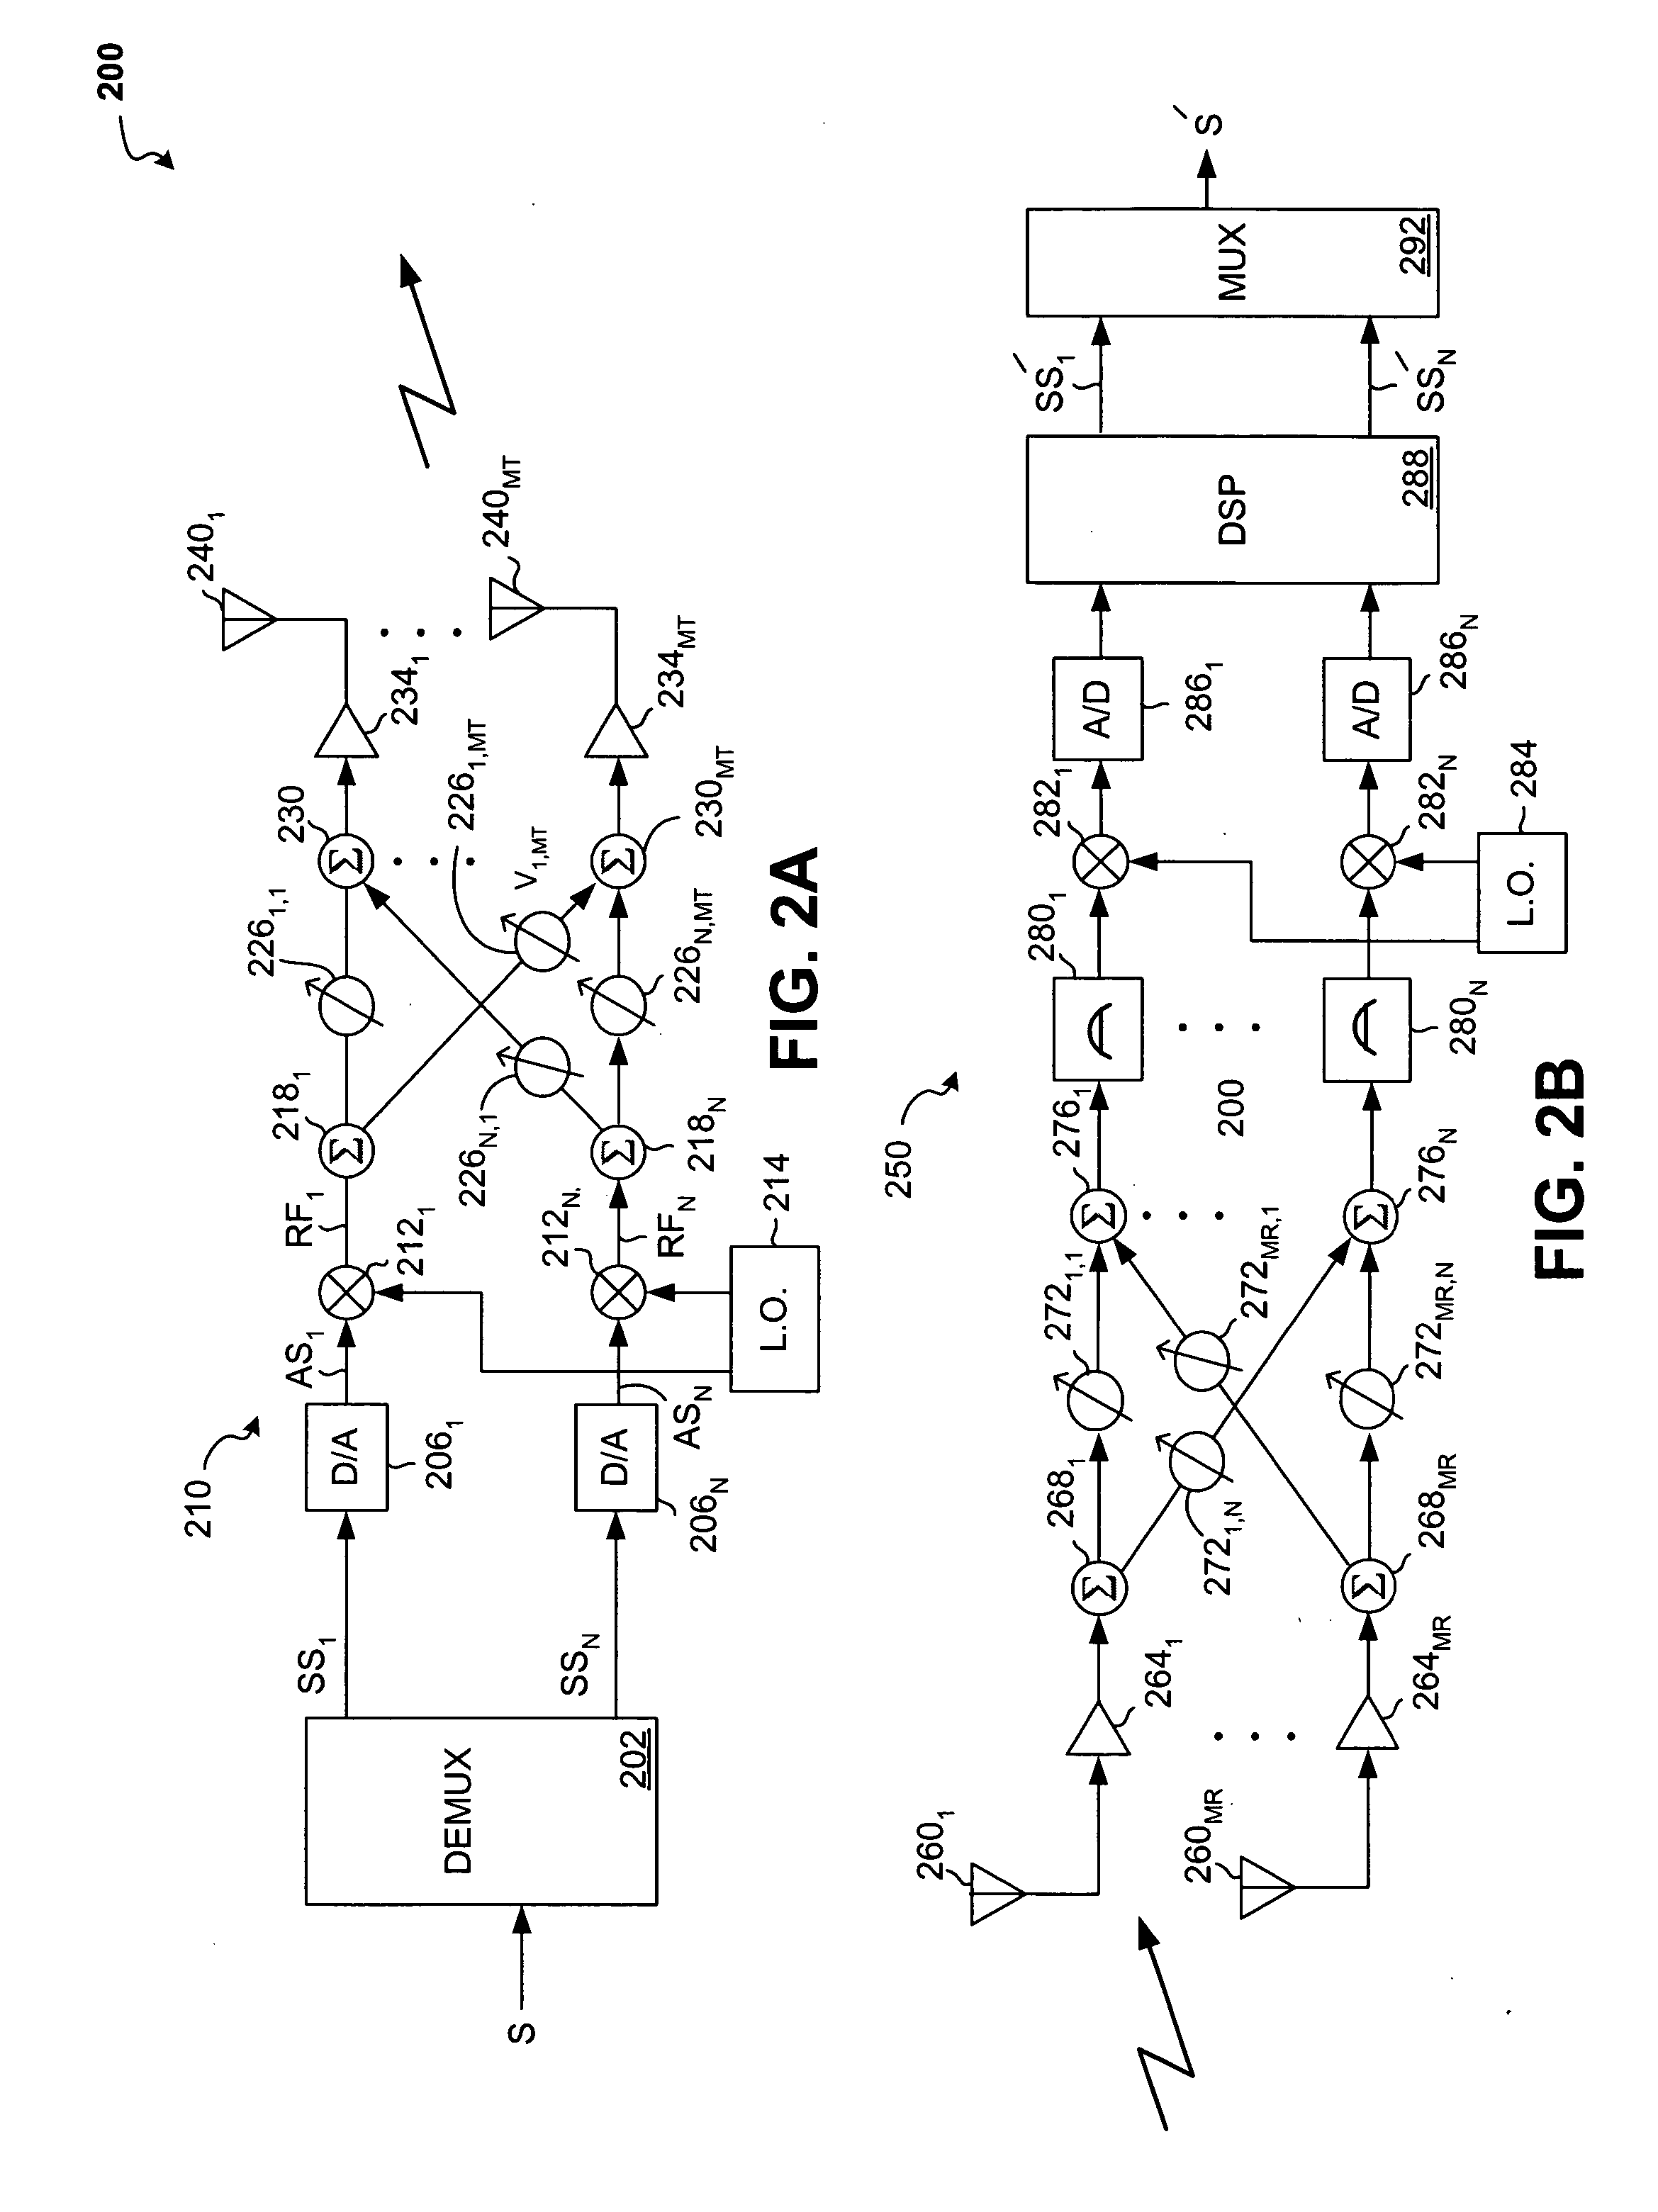 System and method for RF signal combining and adaptive bit loading for data rate maximization in multi-antenna communication systems